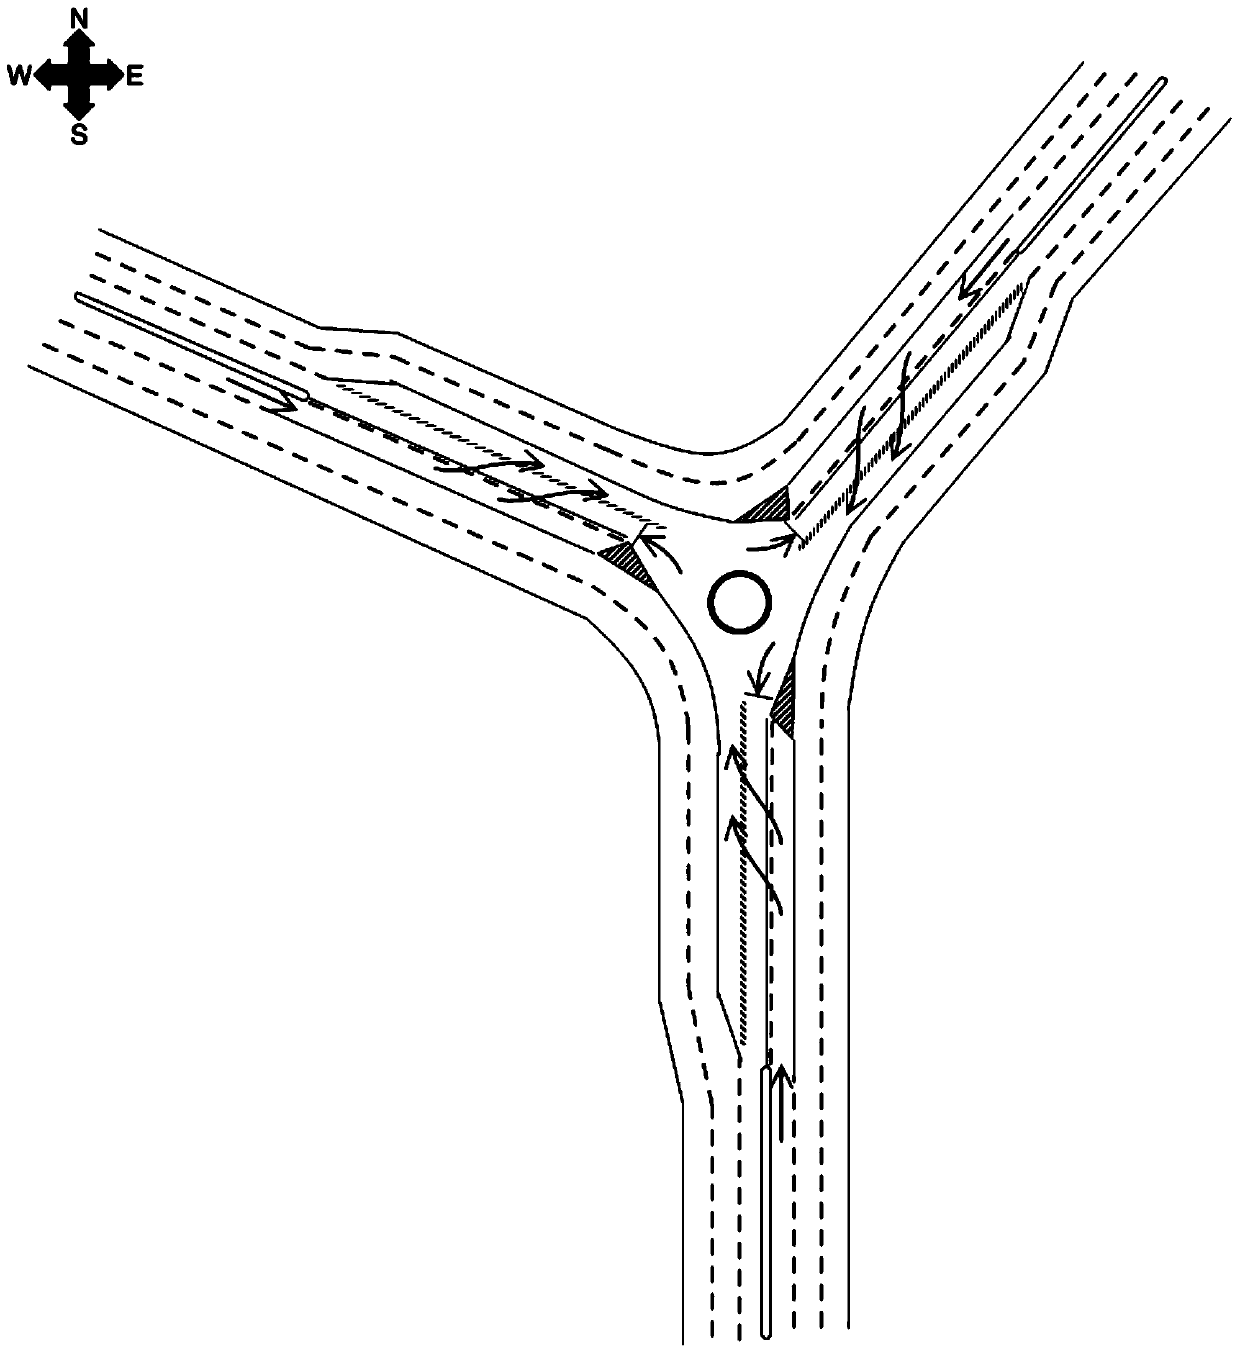 Intersection structure of an intersection and its left circular control method